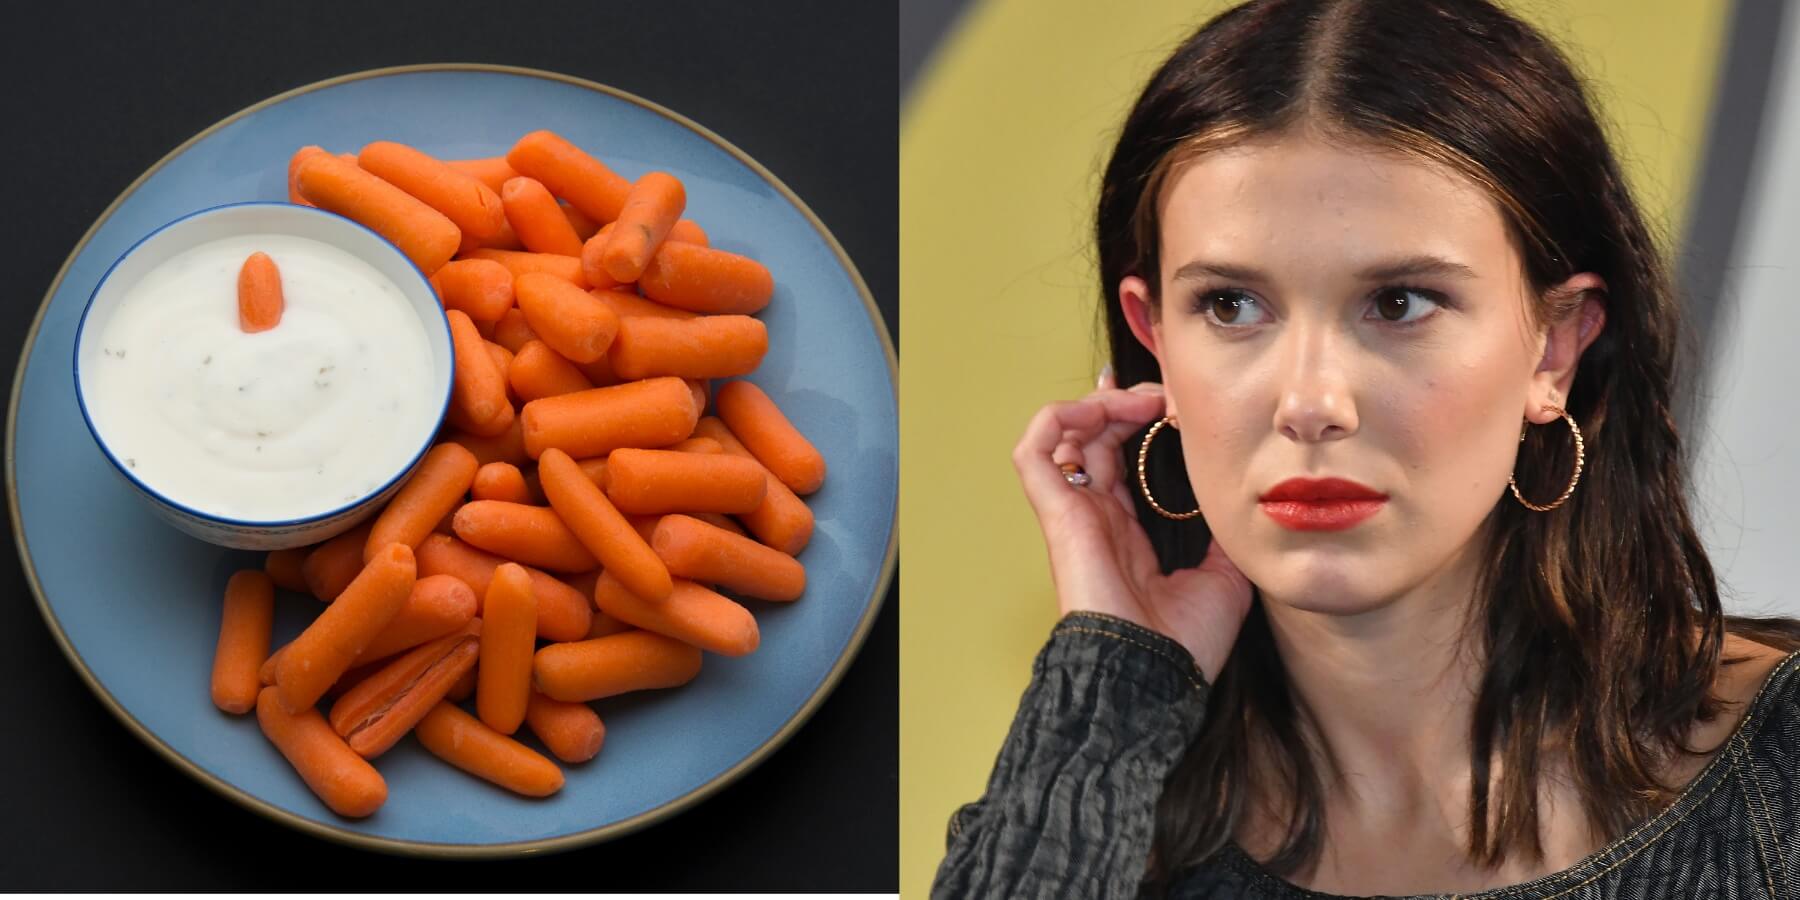 Millie Bobby Brown loves carrots but don't offer her ranch dressing to dip them in.